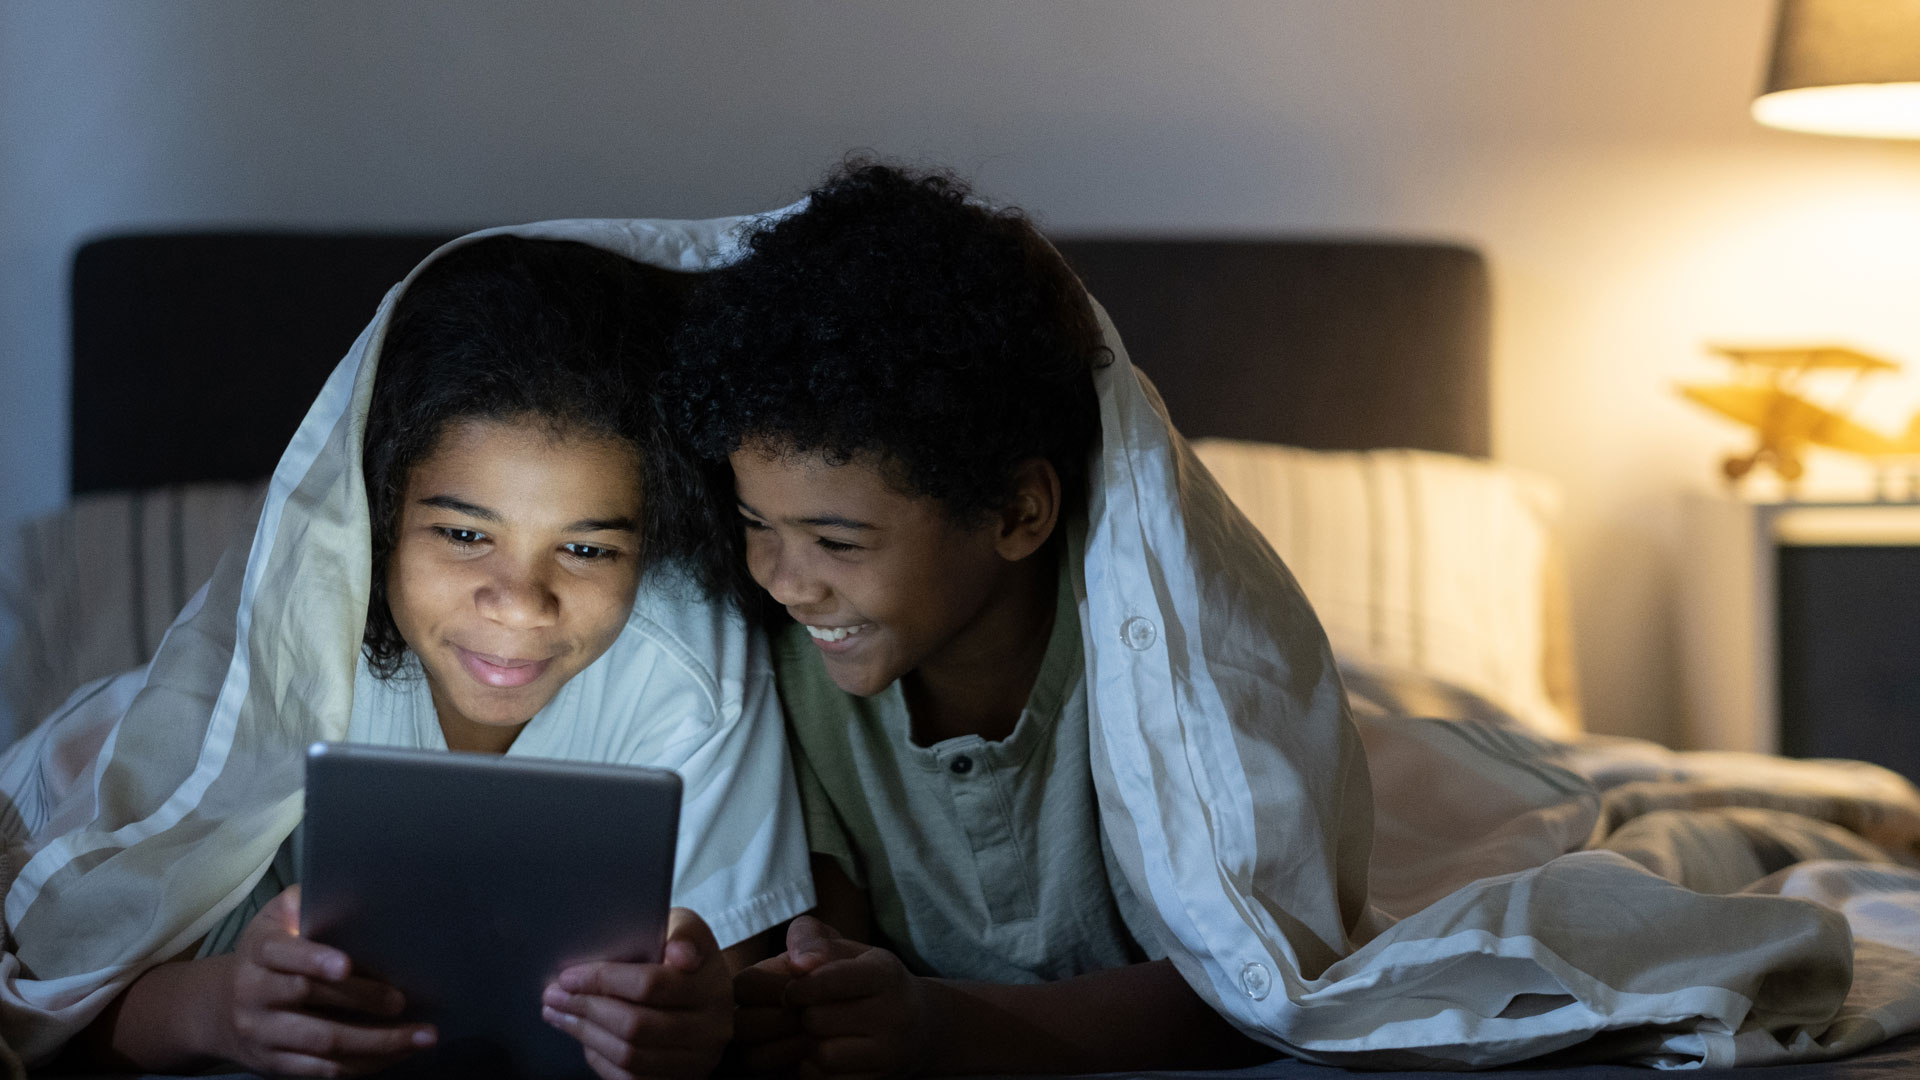 two children smiling looking at a tablet device